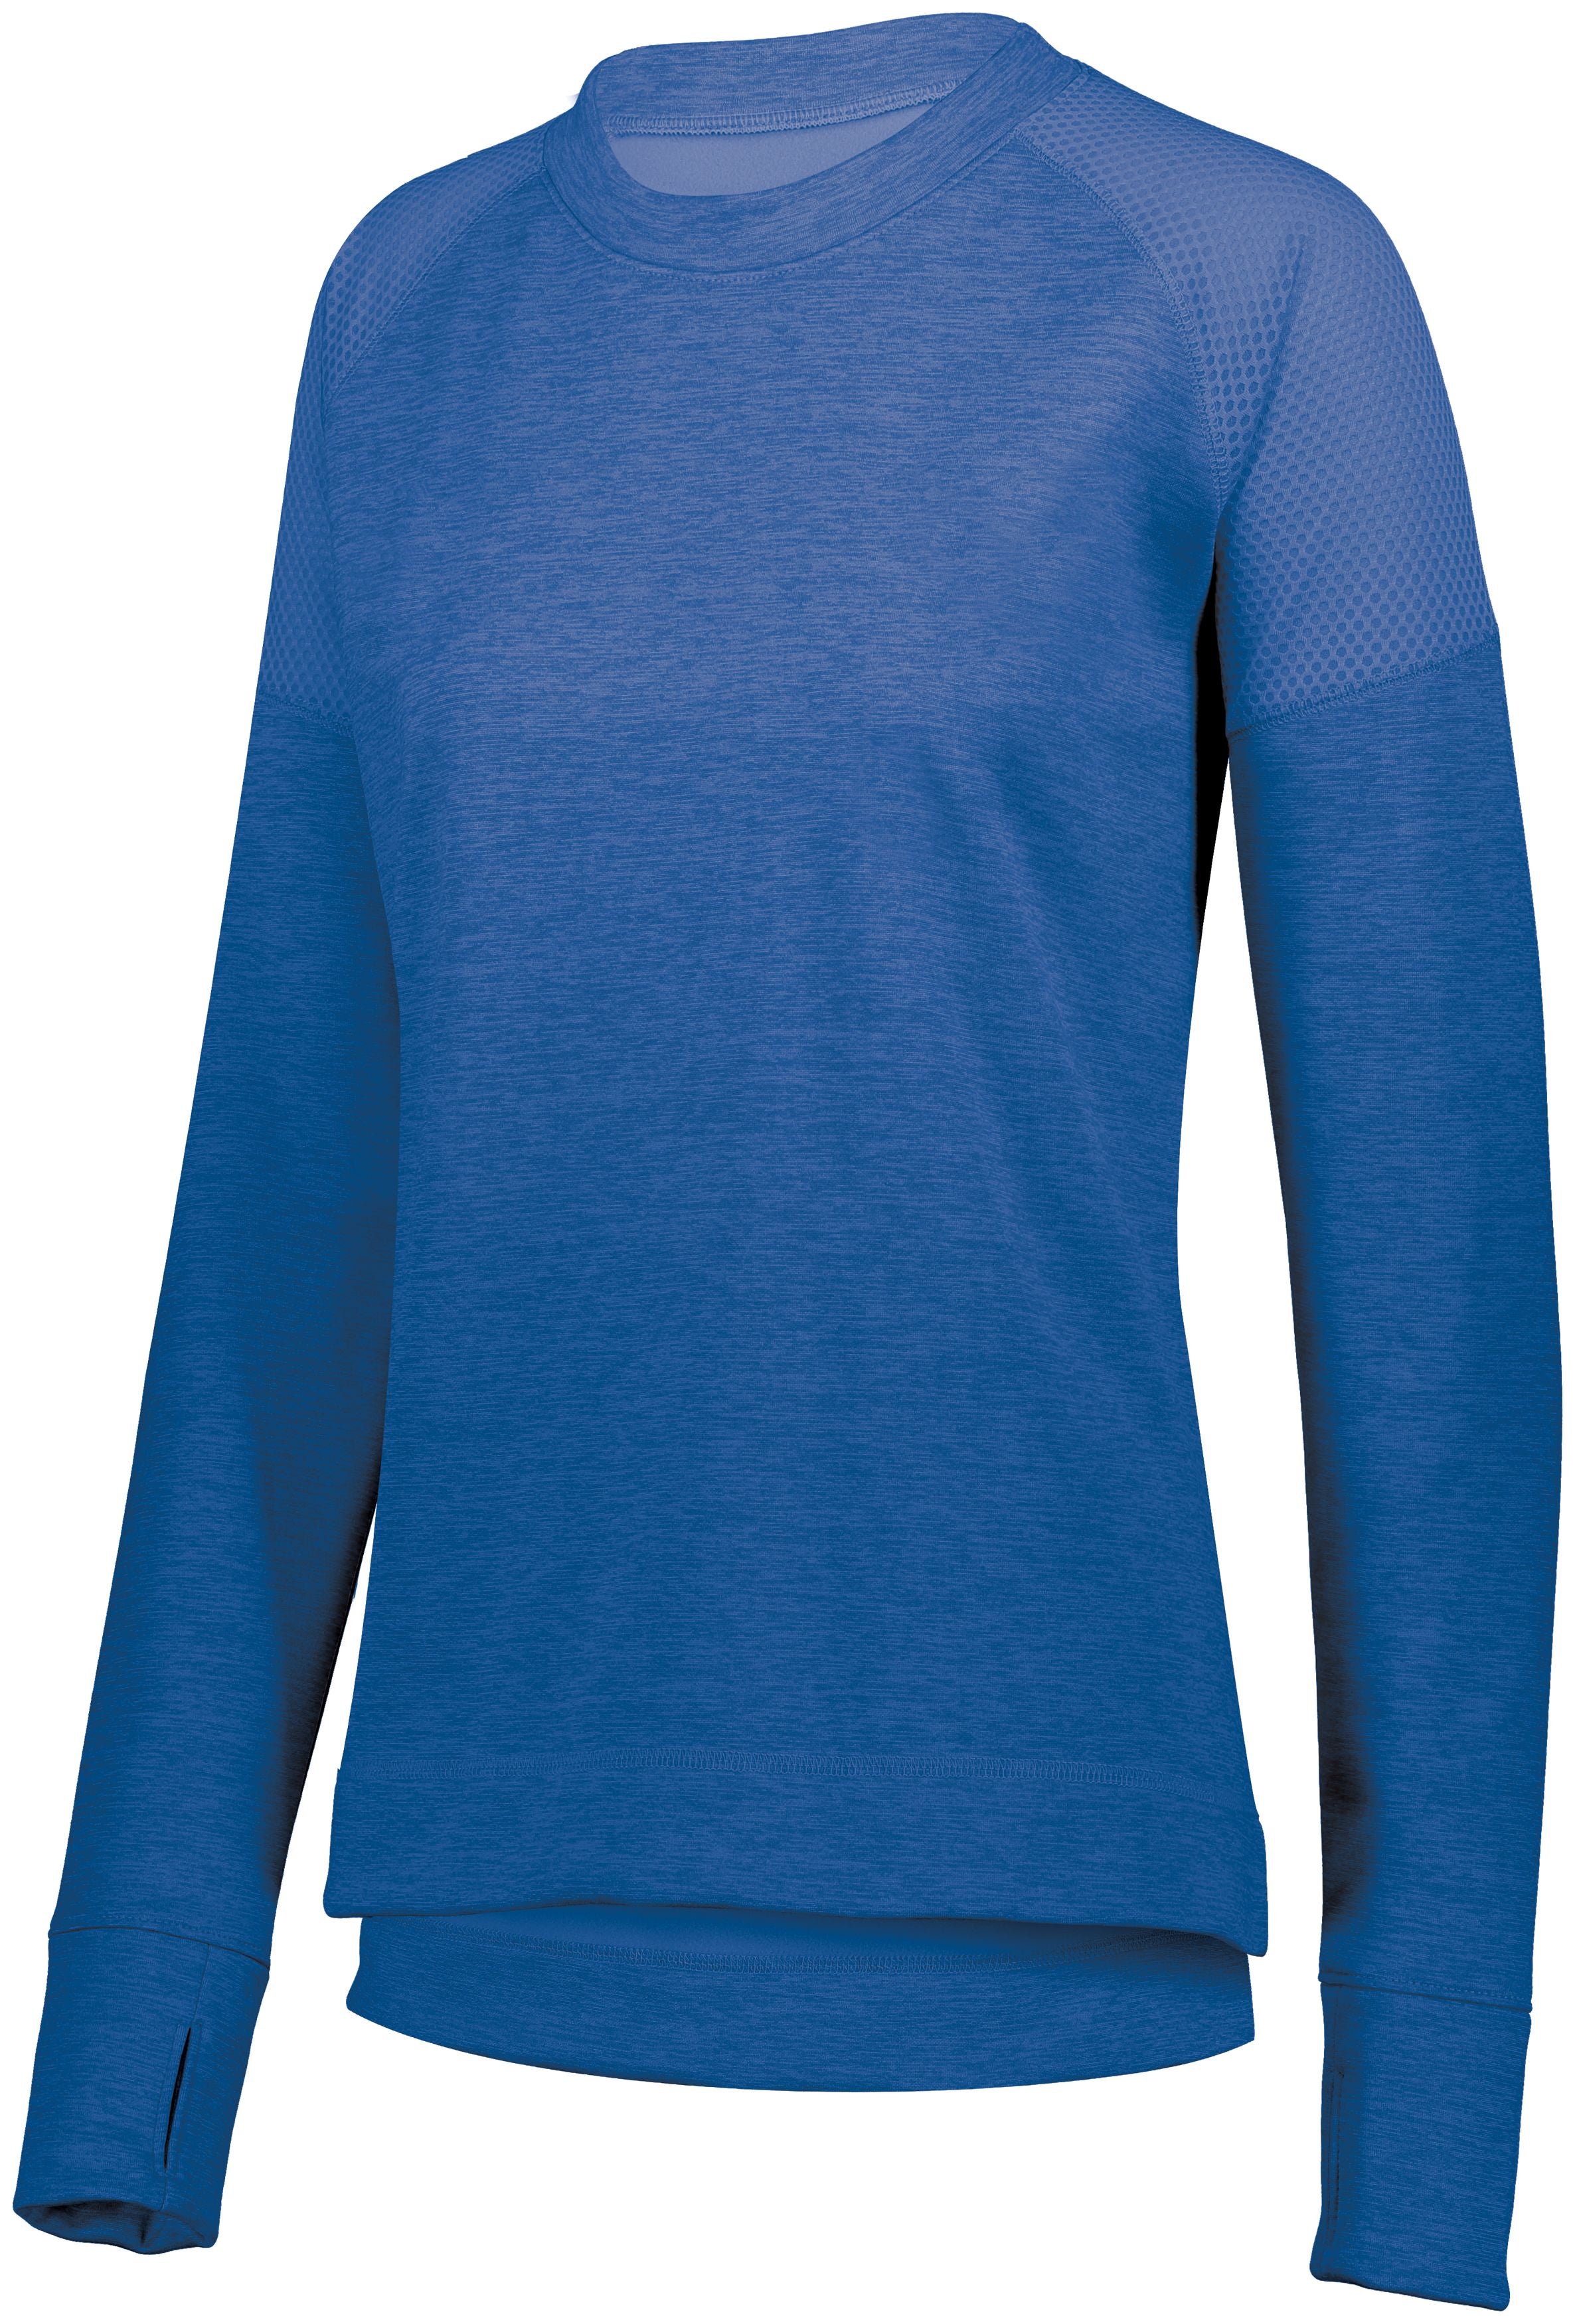 Augusta Sportswear Ladies Zoe Tonal Heather Pullover in Royal  -Part of the Ladies, Ladies-Pullover, Augusta-Products, Outerwear, Tonal-Fleece-Collection product lines at KanaleyCreations.com